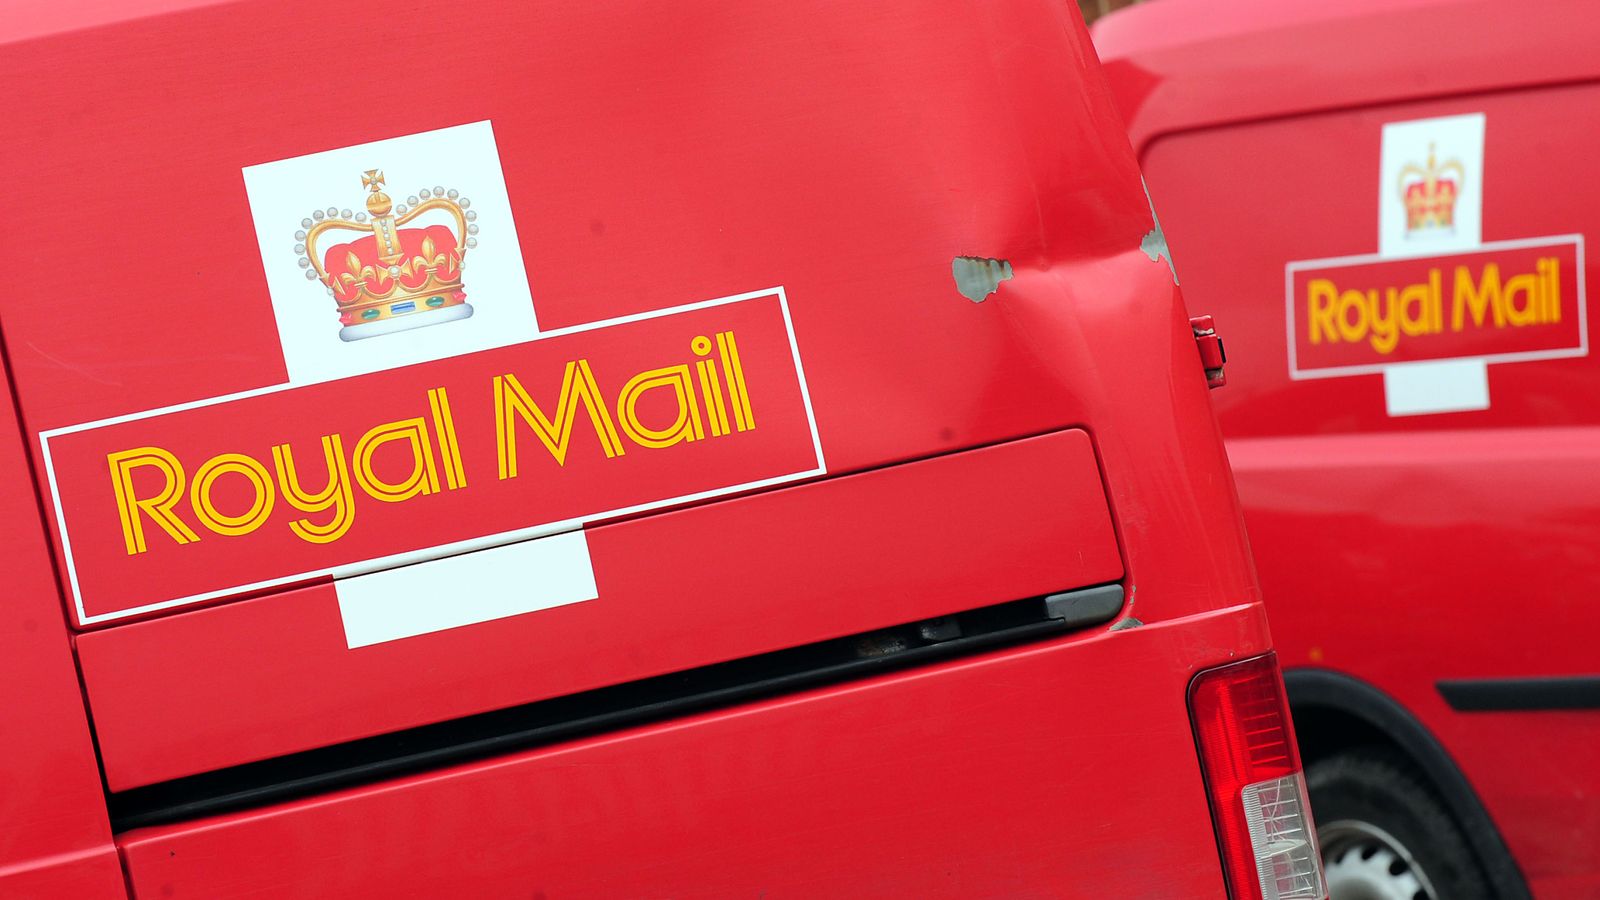 Royal Mail could face Ofcom fine for missing performance targets with too many slow deliveries